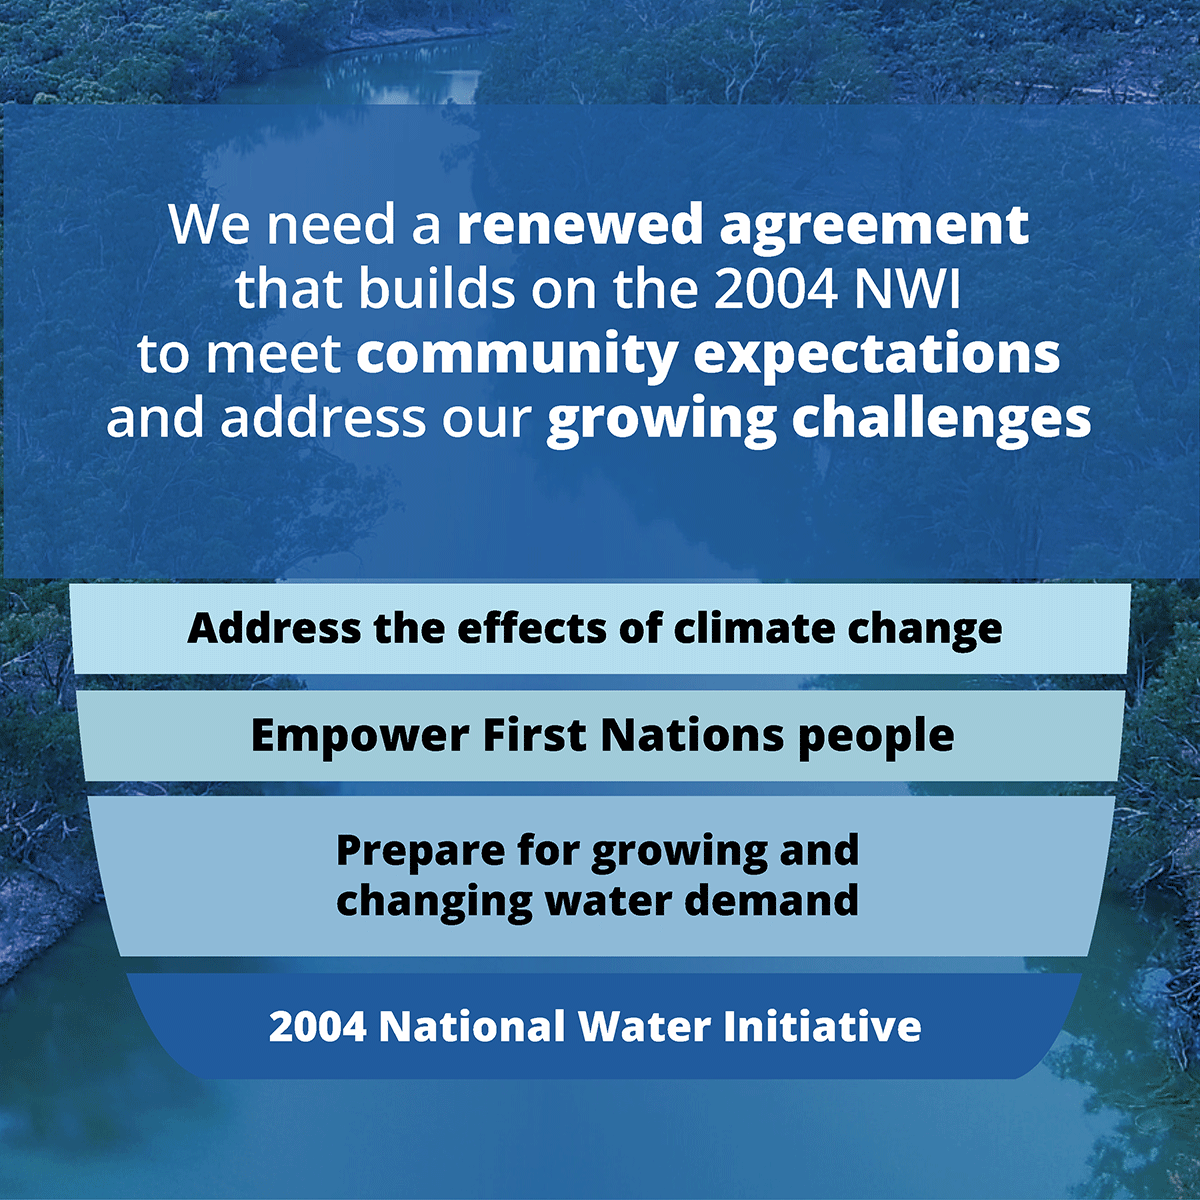 We need a renewed agreement that builds on the 2004 NWI to meet community expectations and address our growing challenges. Address the effects of climate change; Empower First Nations people; and Prepare for growing and changing water demand. 2004 National Water Initiative.